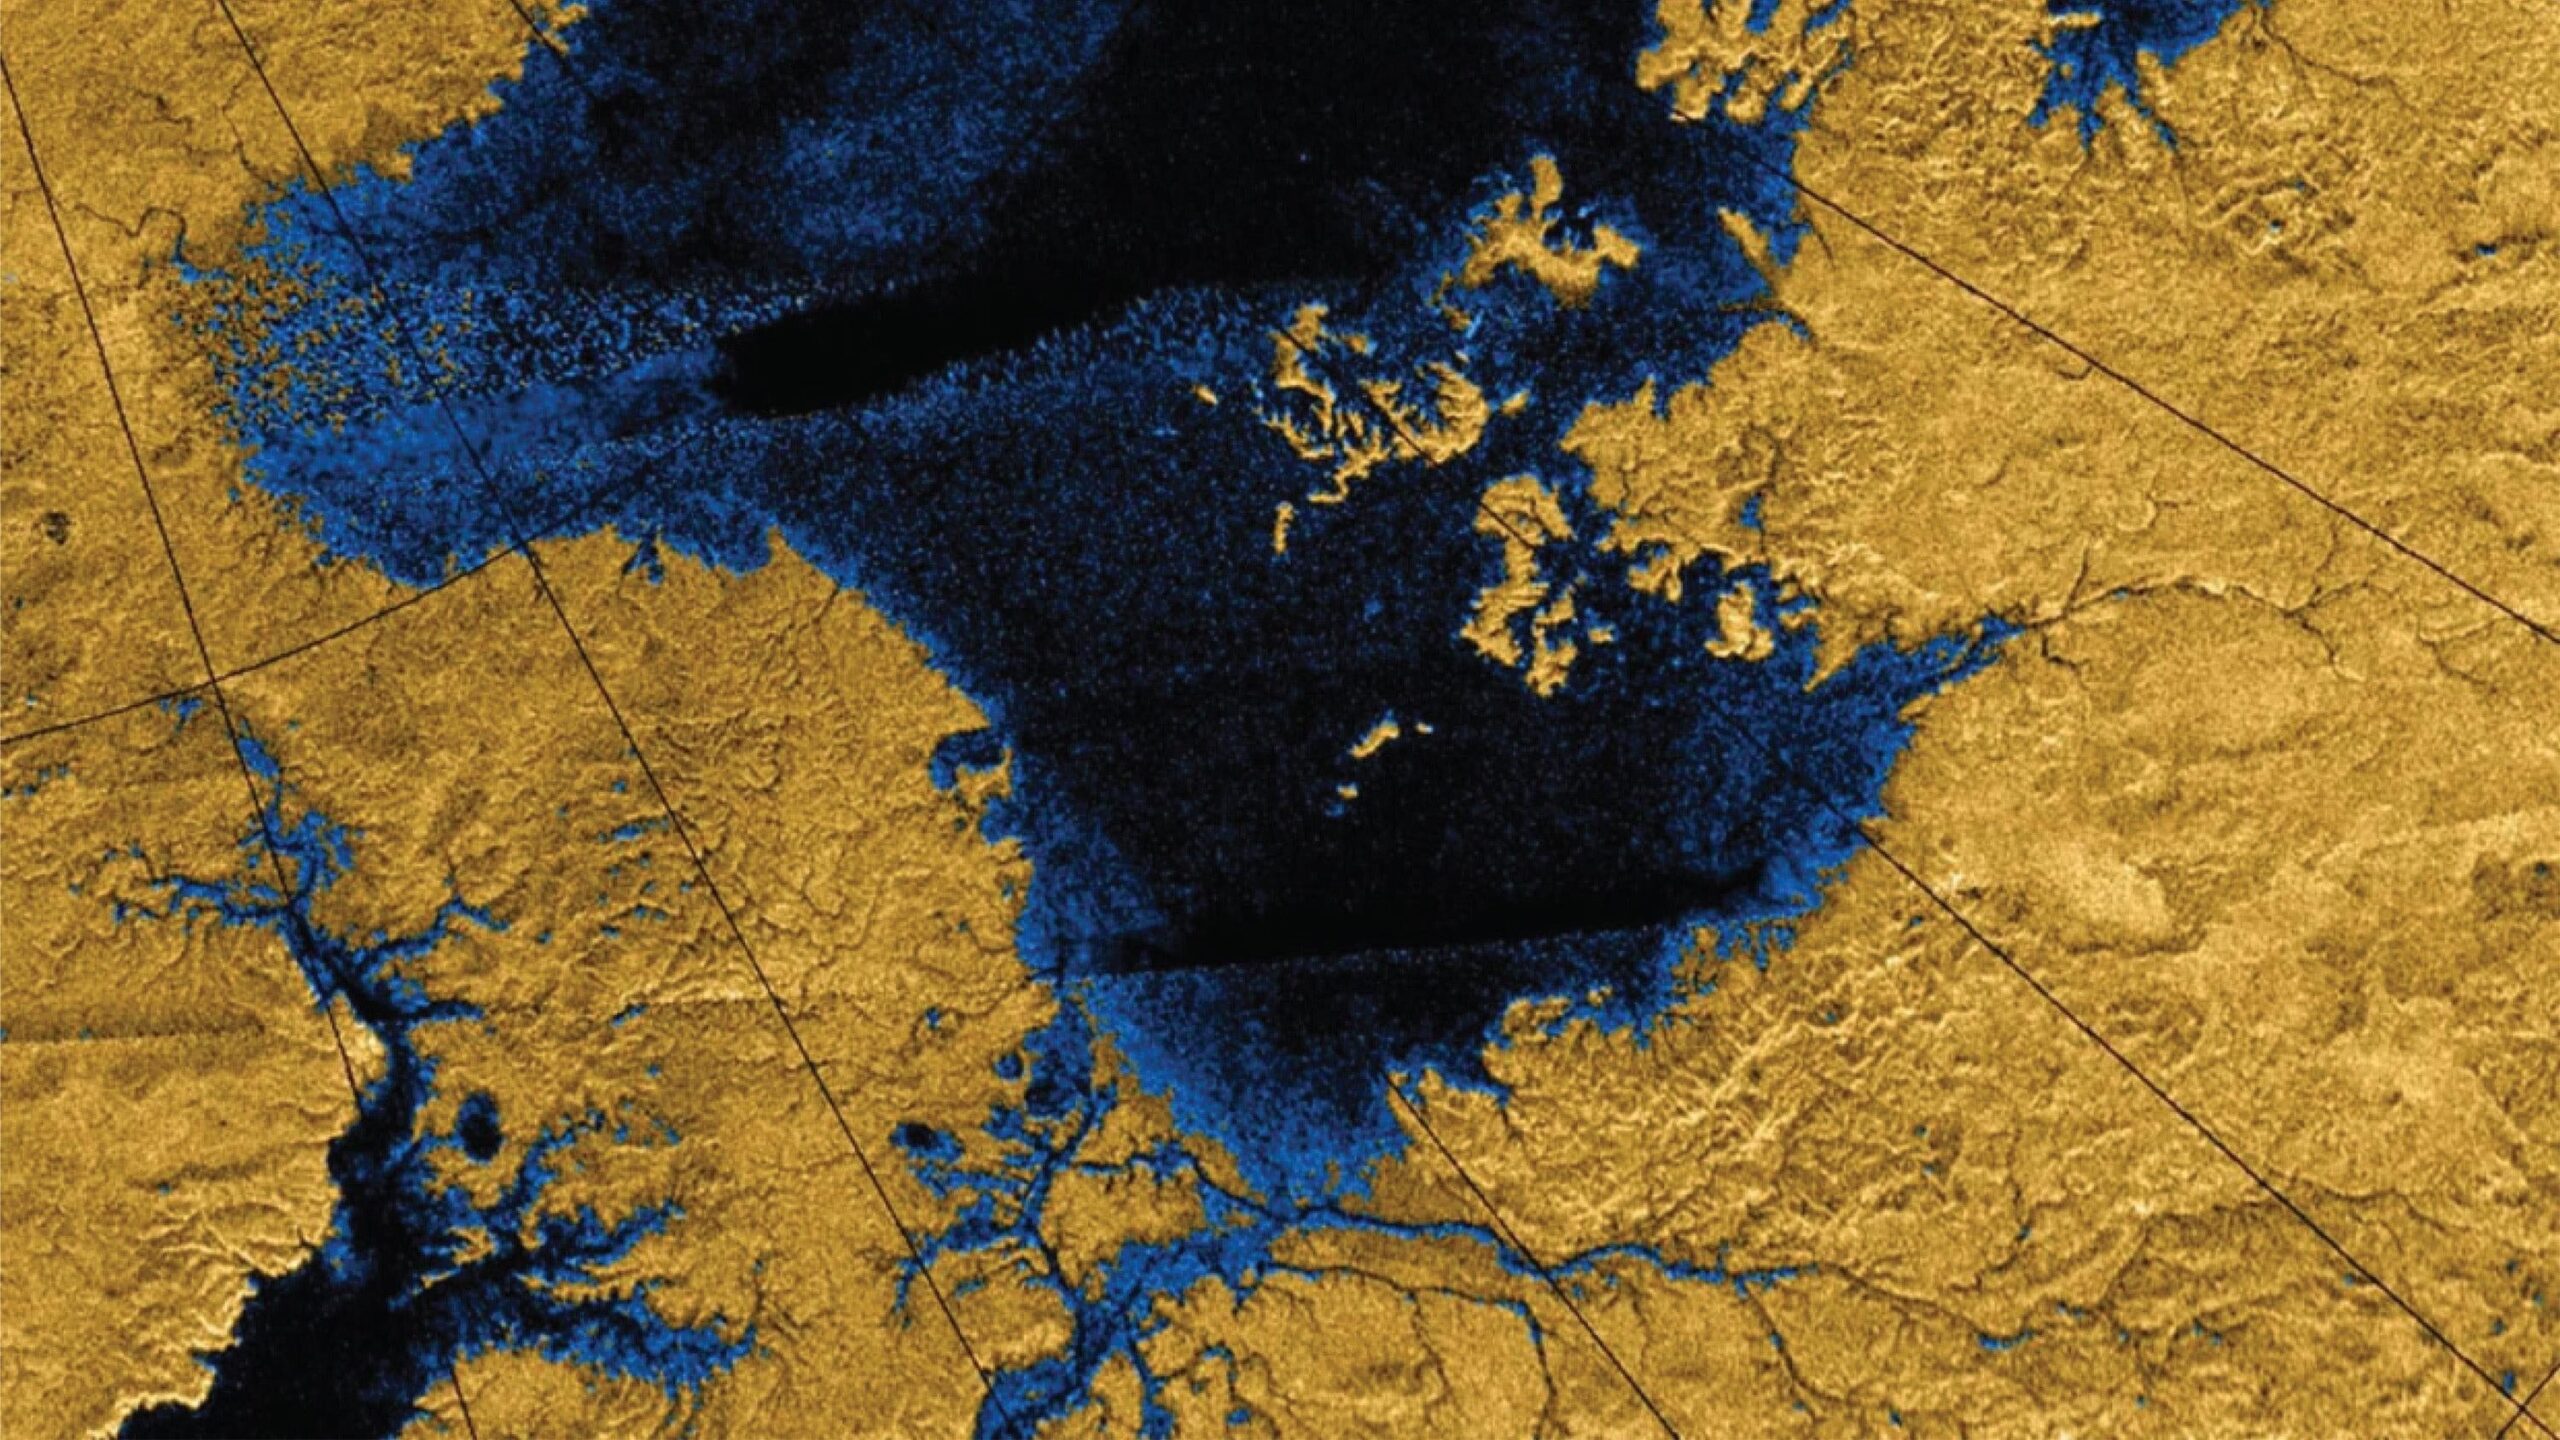 The flow rate of rivers on Titan turns out to be very similar to Earth’s